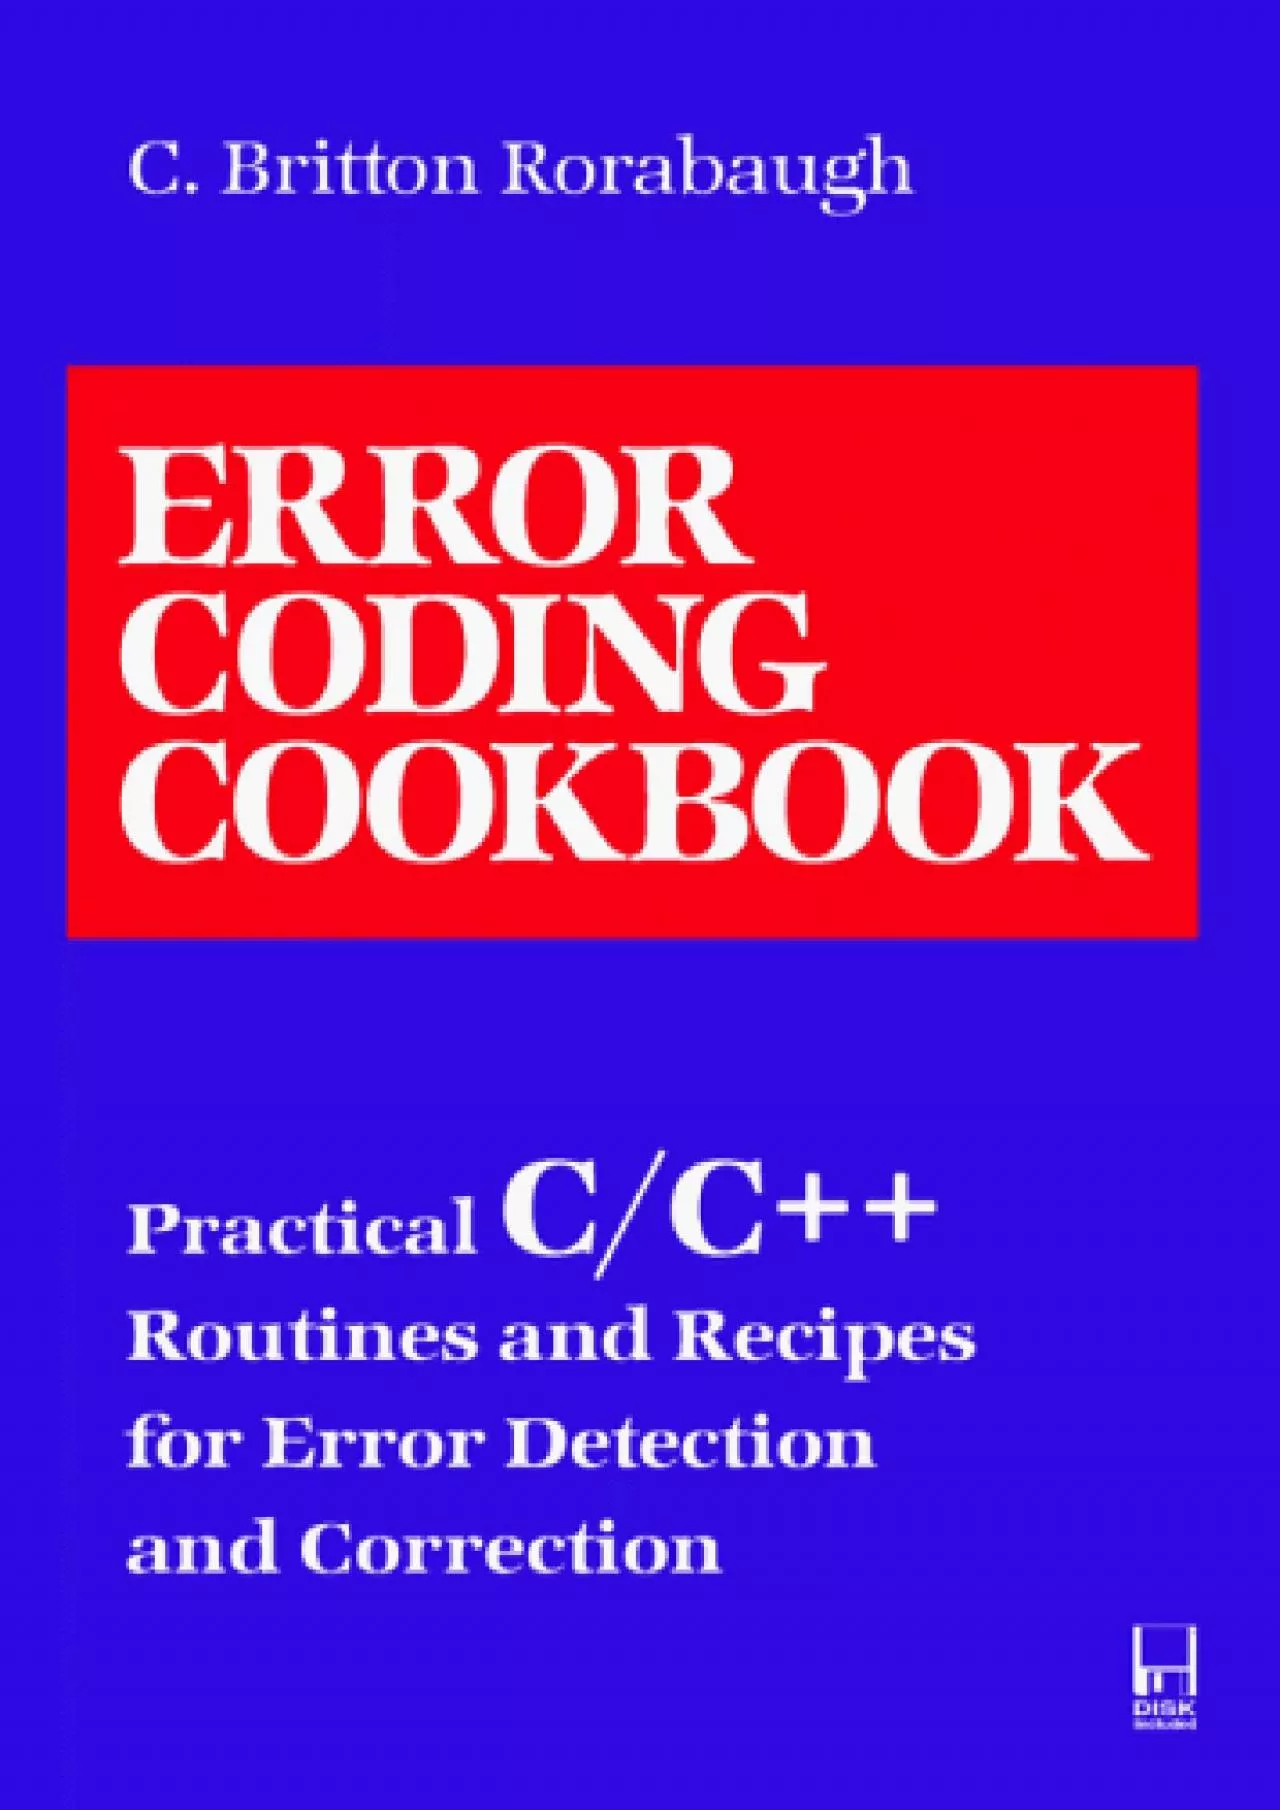 [FREE]-Error Coding Cookbook: Practical C/C++ Routines and Recipes for Error Detection